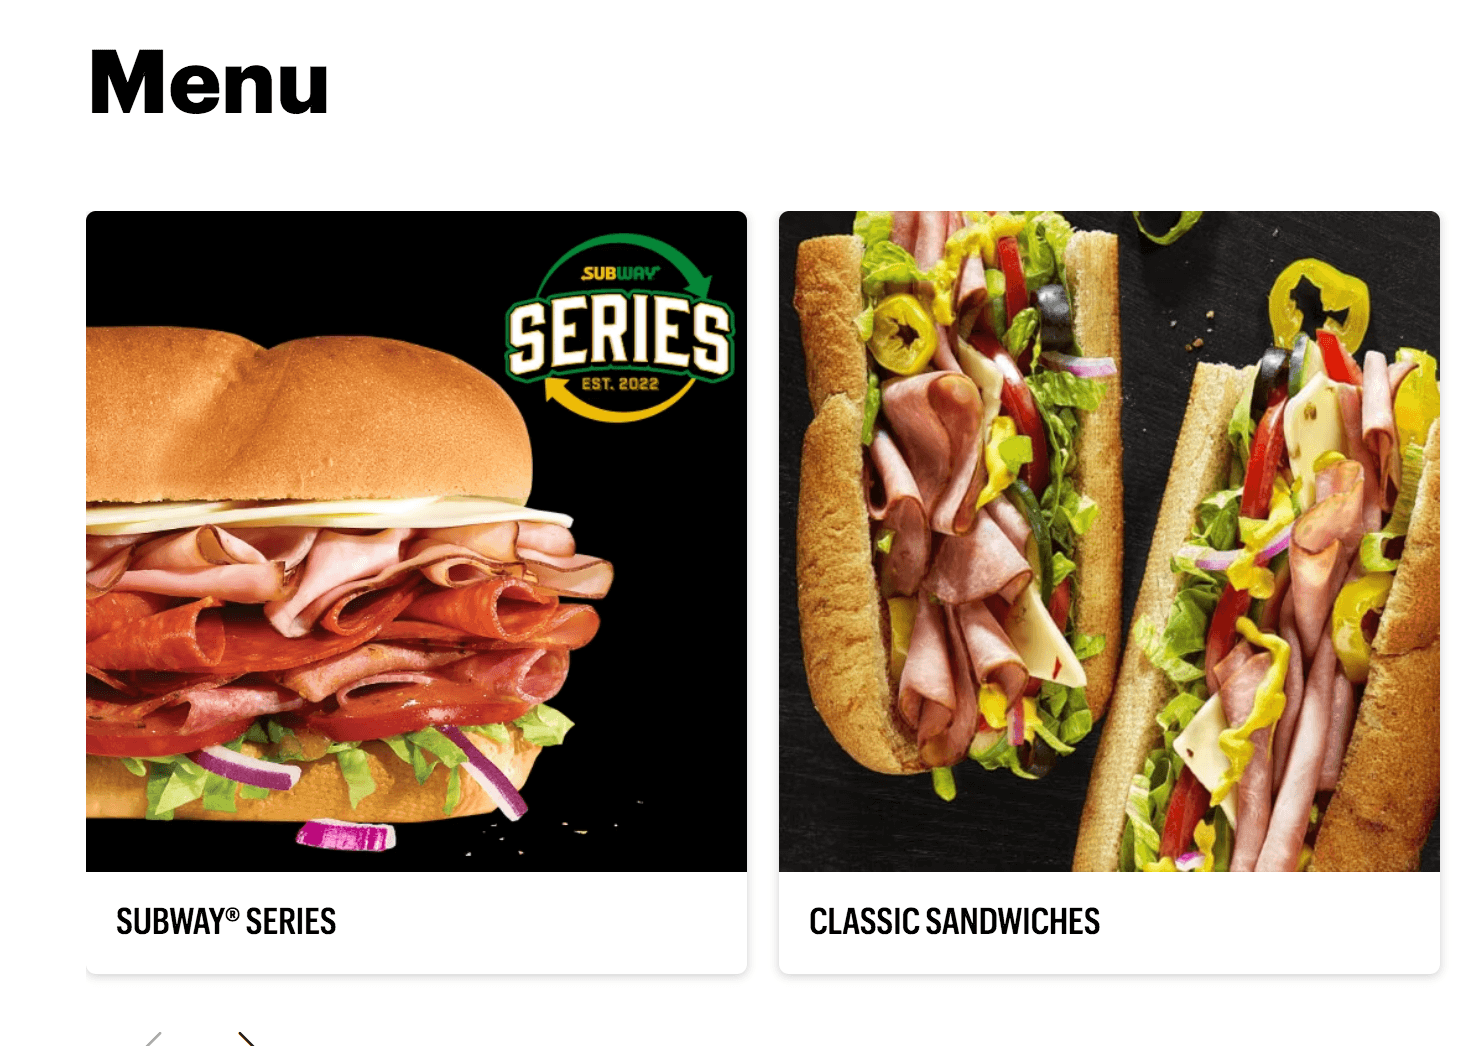 Subway hoagies featured on their website